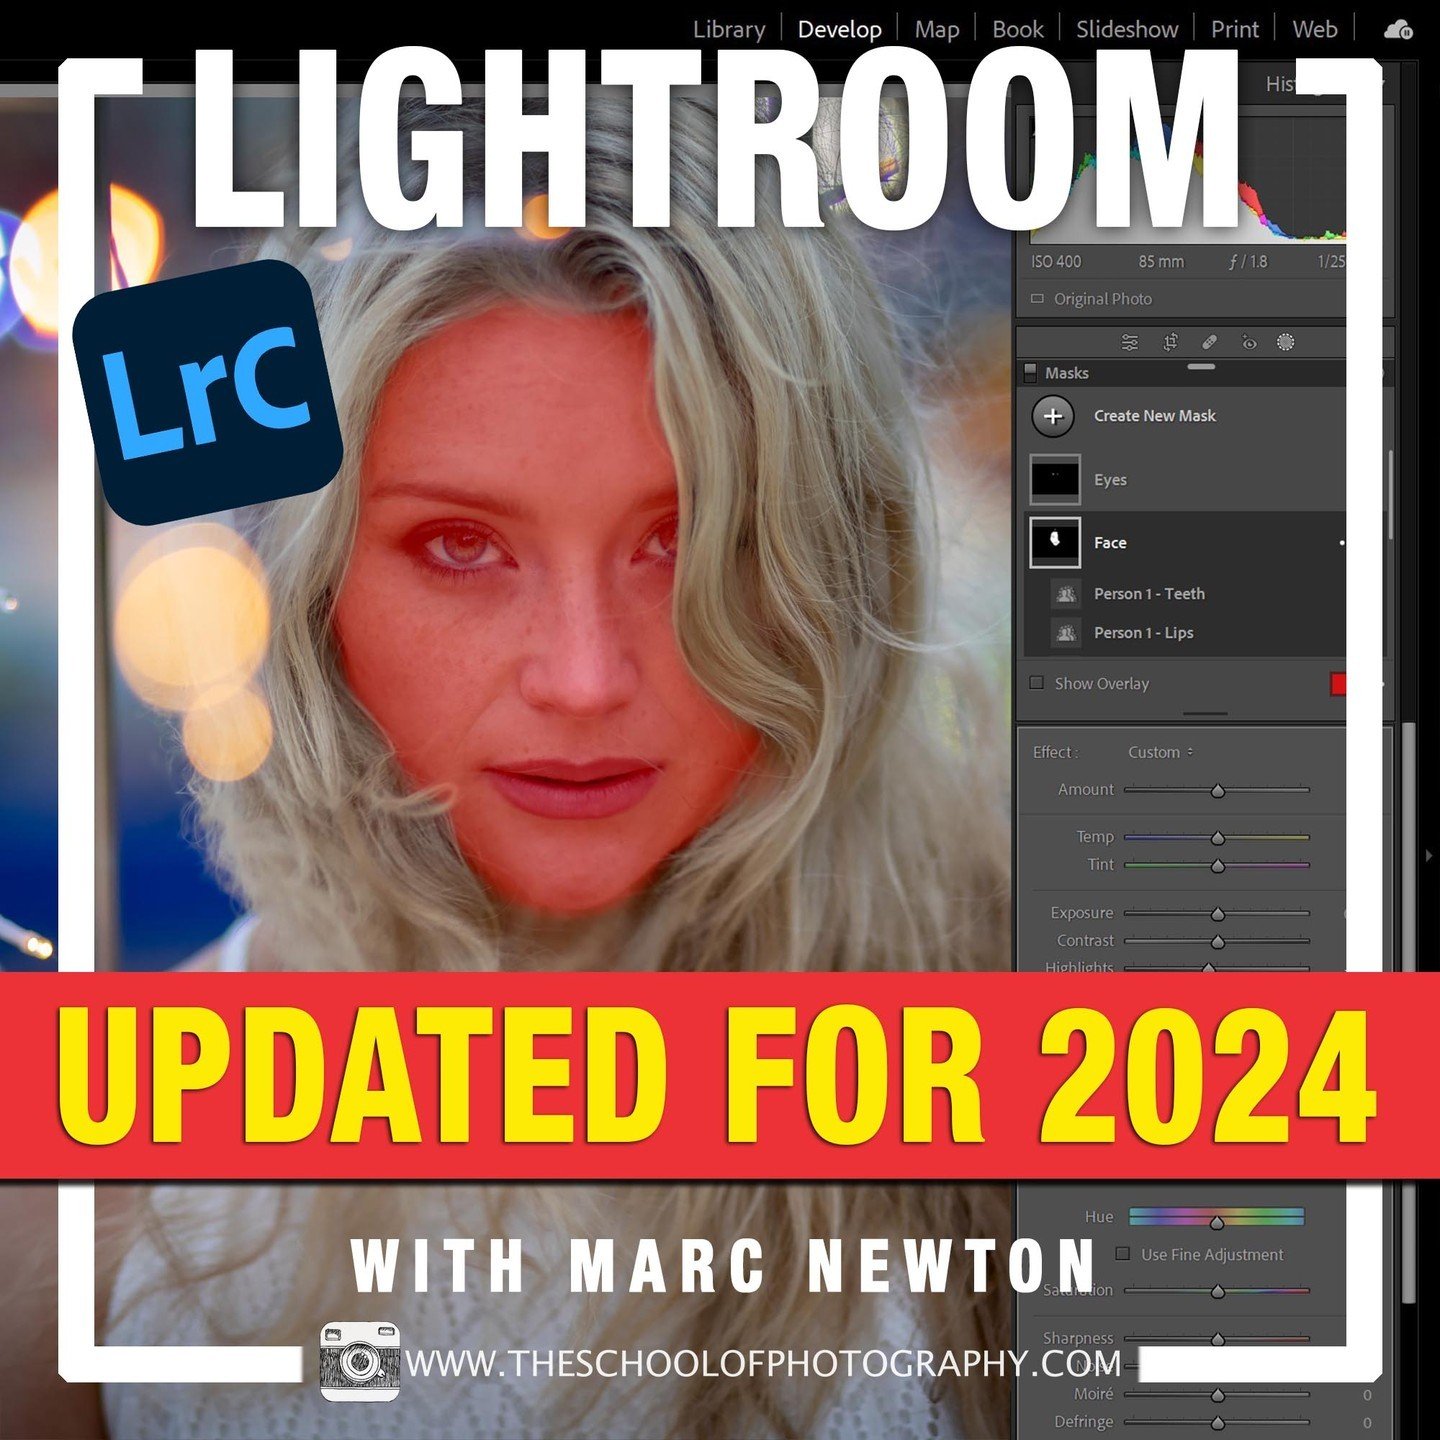 It&rsquo;s your last chance to save 20% on our yearly membership 🚨 

We&rsquo;ve just updated our Lightroom and Photoshop courses for 2024! To celebrate this, we are giving an extra 20% off our yearly membership which includes our updated Lr and Ps 